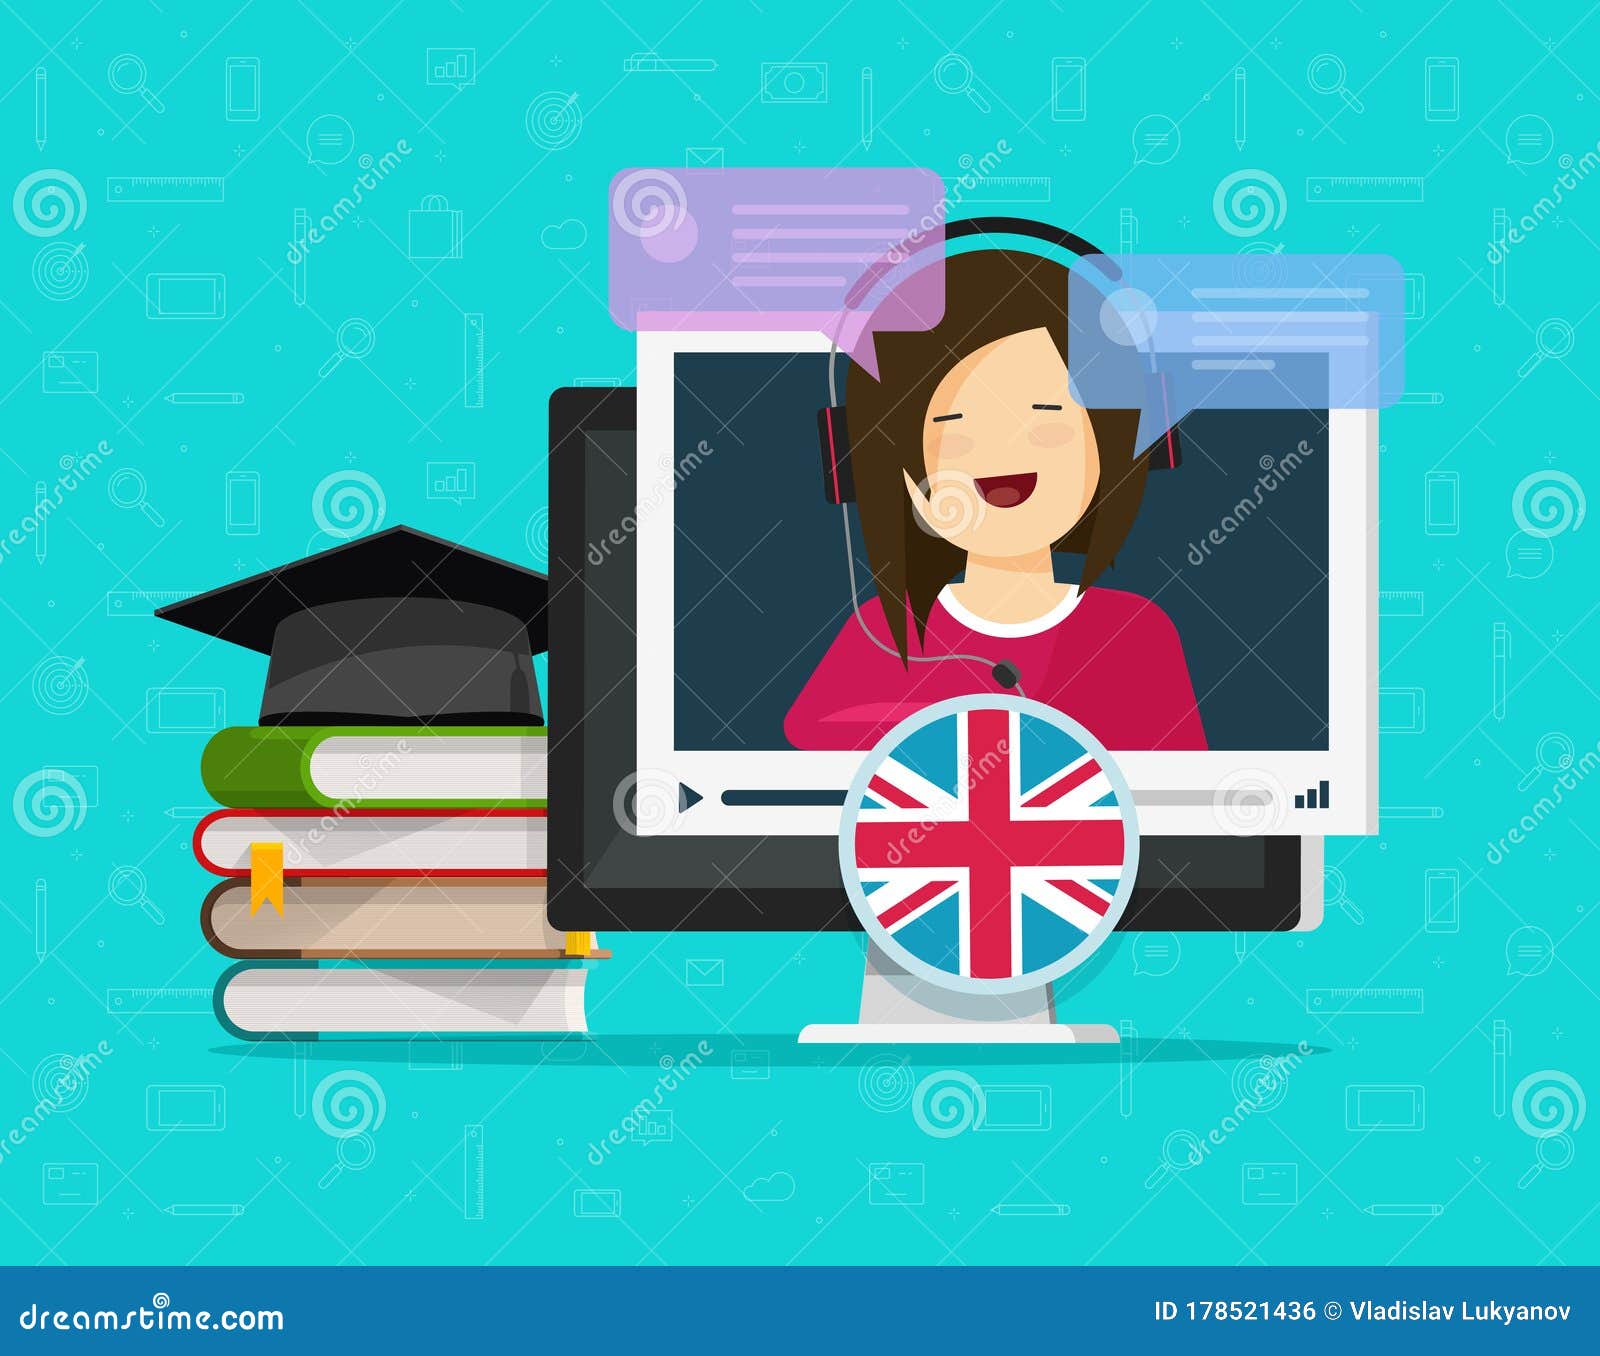 English Language Video Online Distance Learning on Desktop Computer or  Education Concept on Pc with Teacher Speaking Stock Vector - Illustration  of exam, girl: 178521436